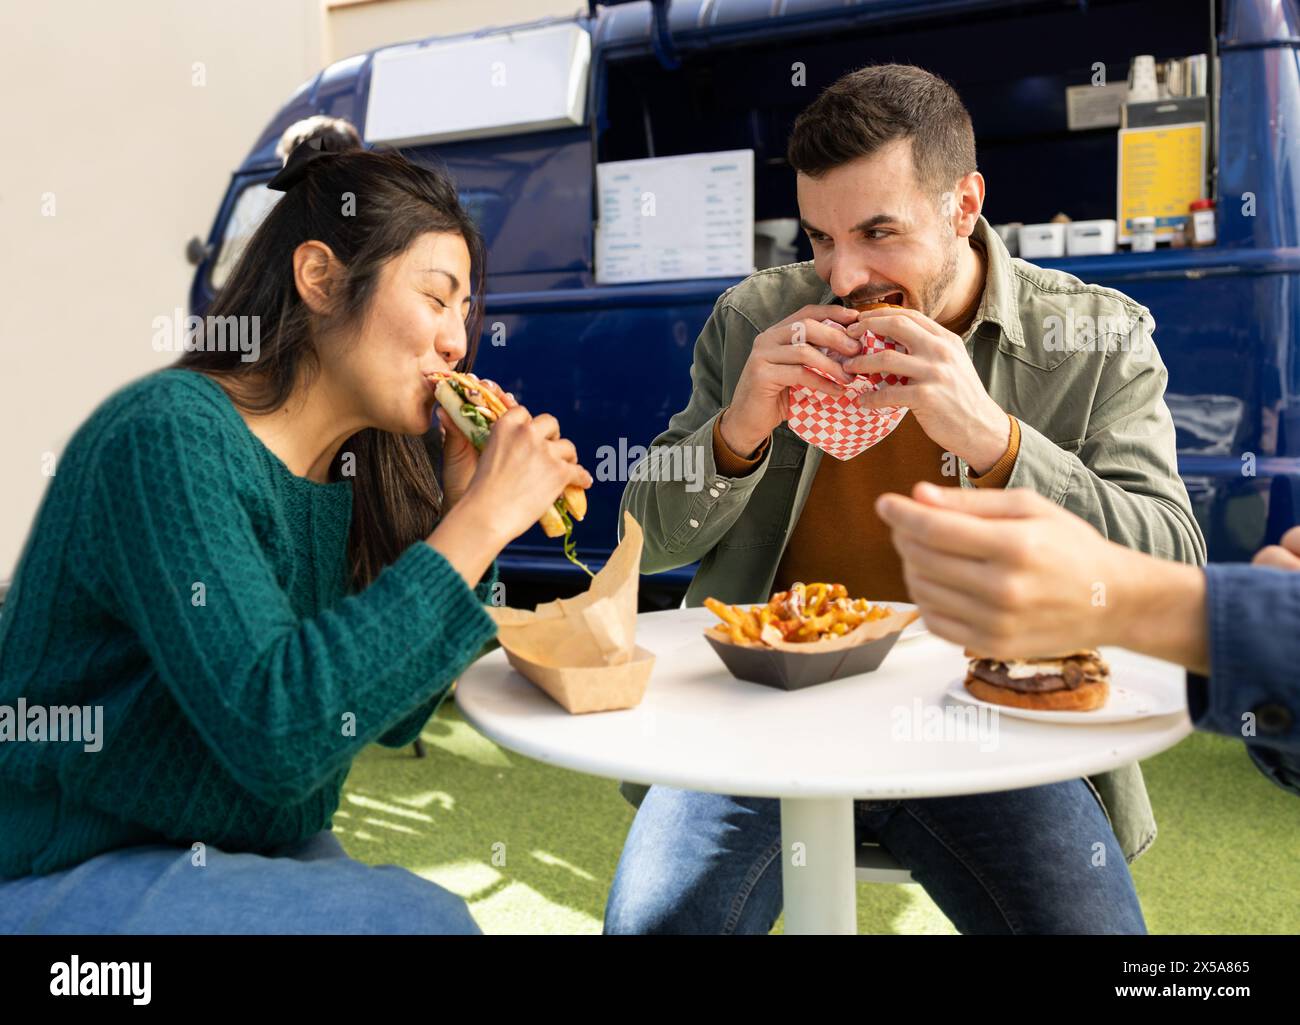 Two friends happily eating street food by a food truck, sharing a casual outdoor dining experience Stock Photo